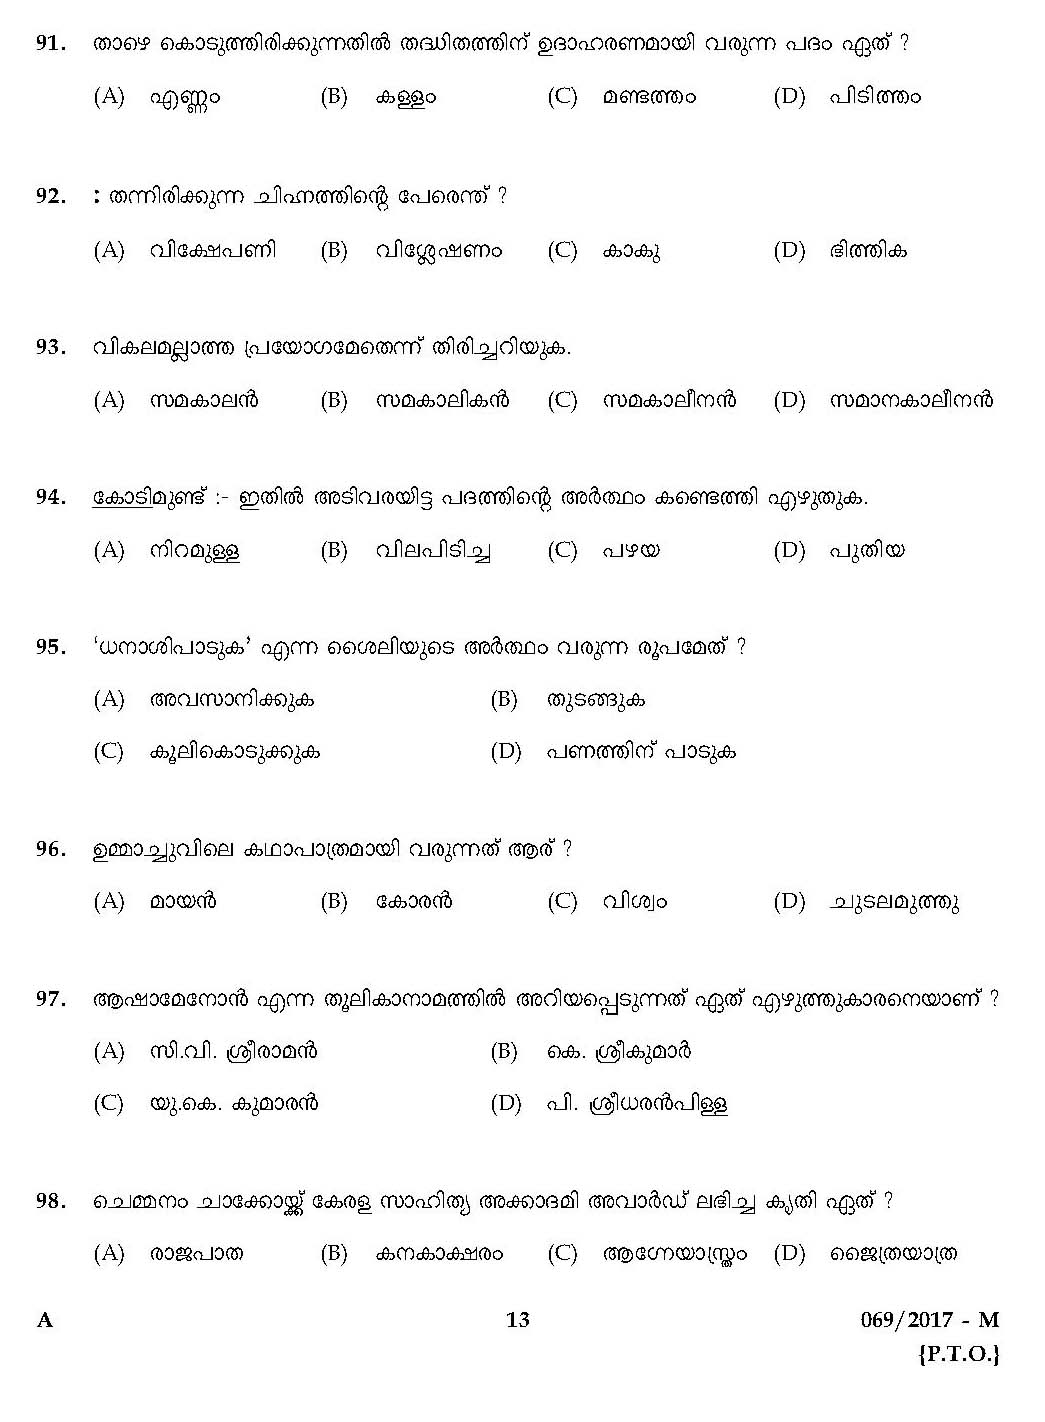 LD Clerk Question Paper 2017 Malayalam Paper Code 0692017 M 12